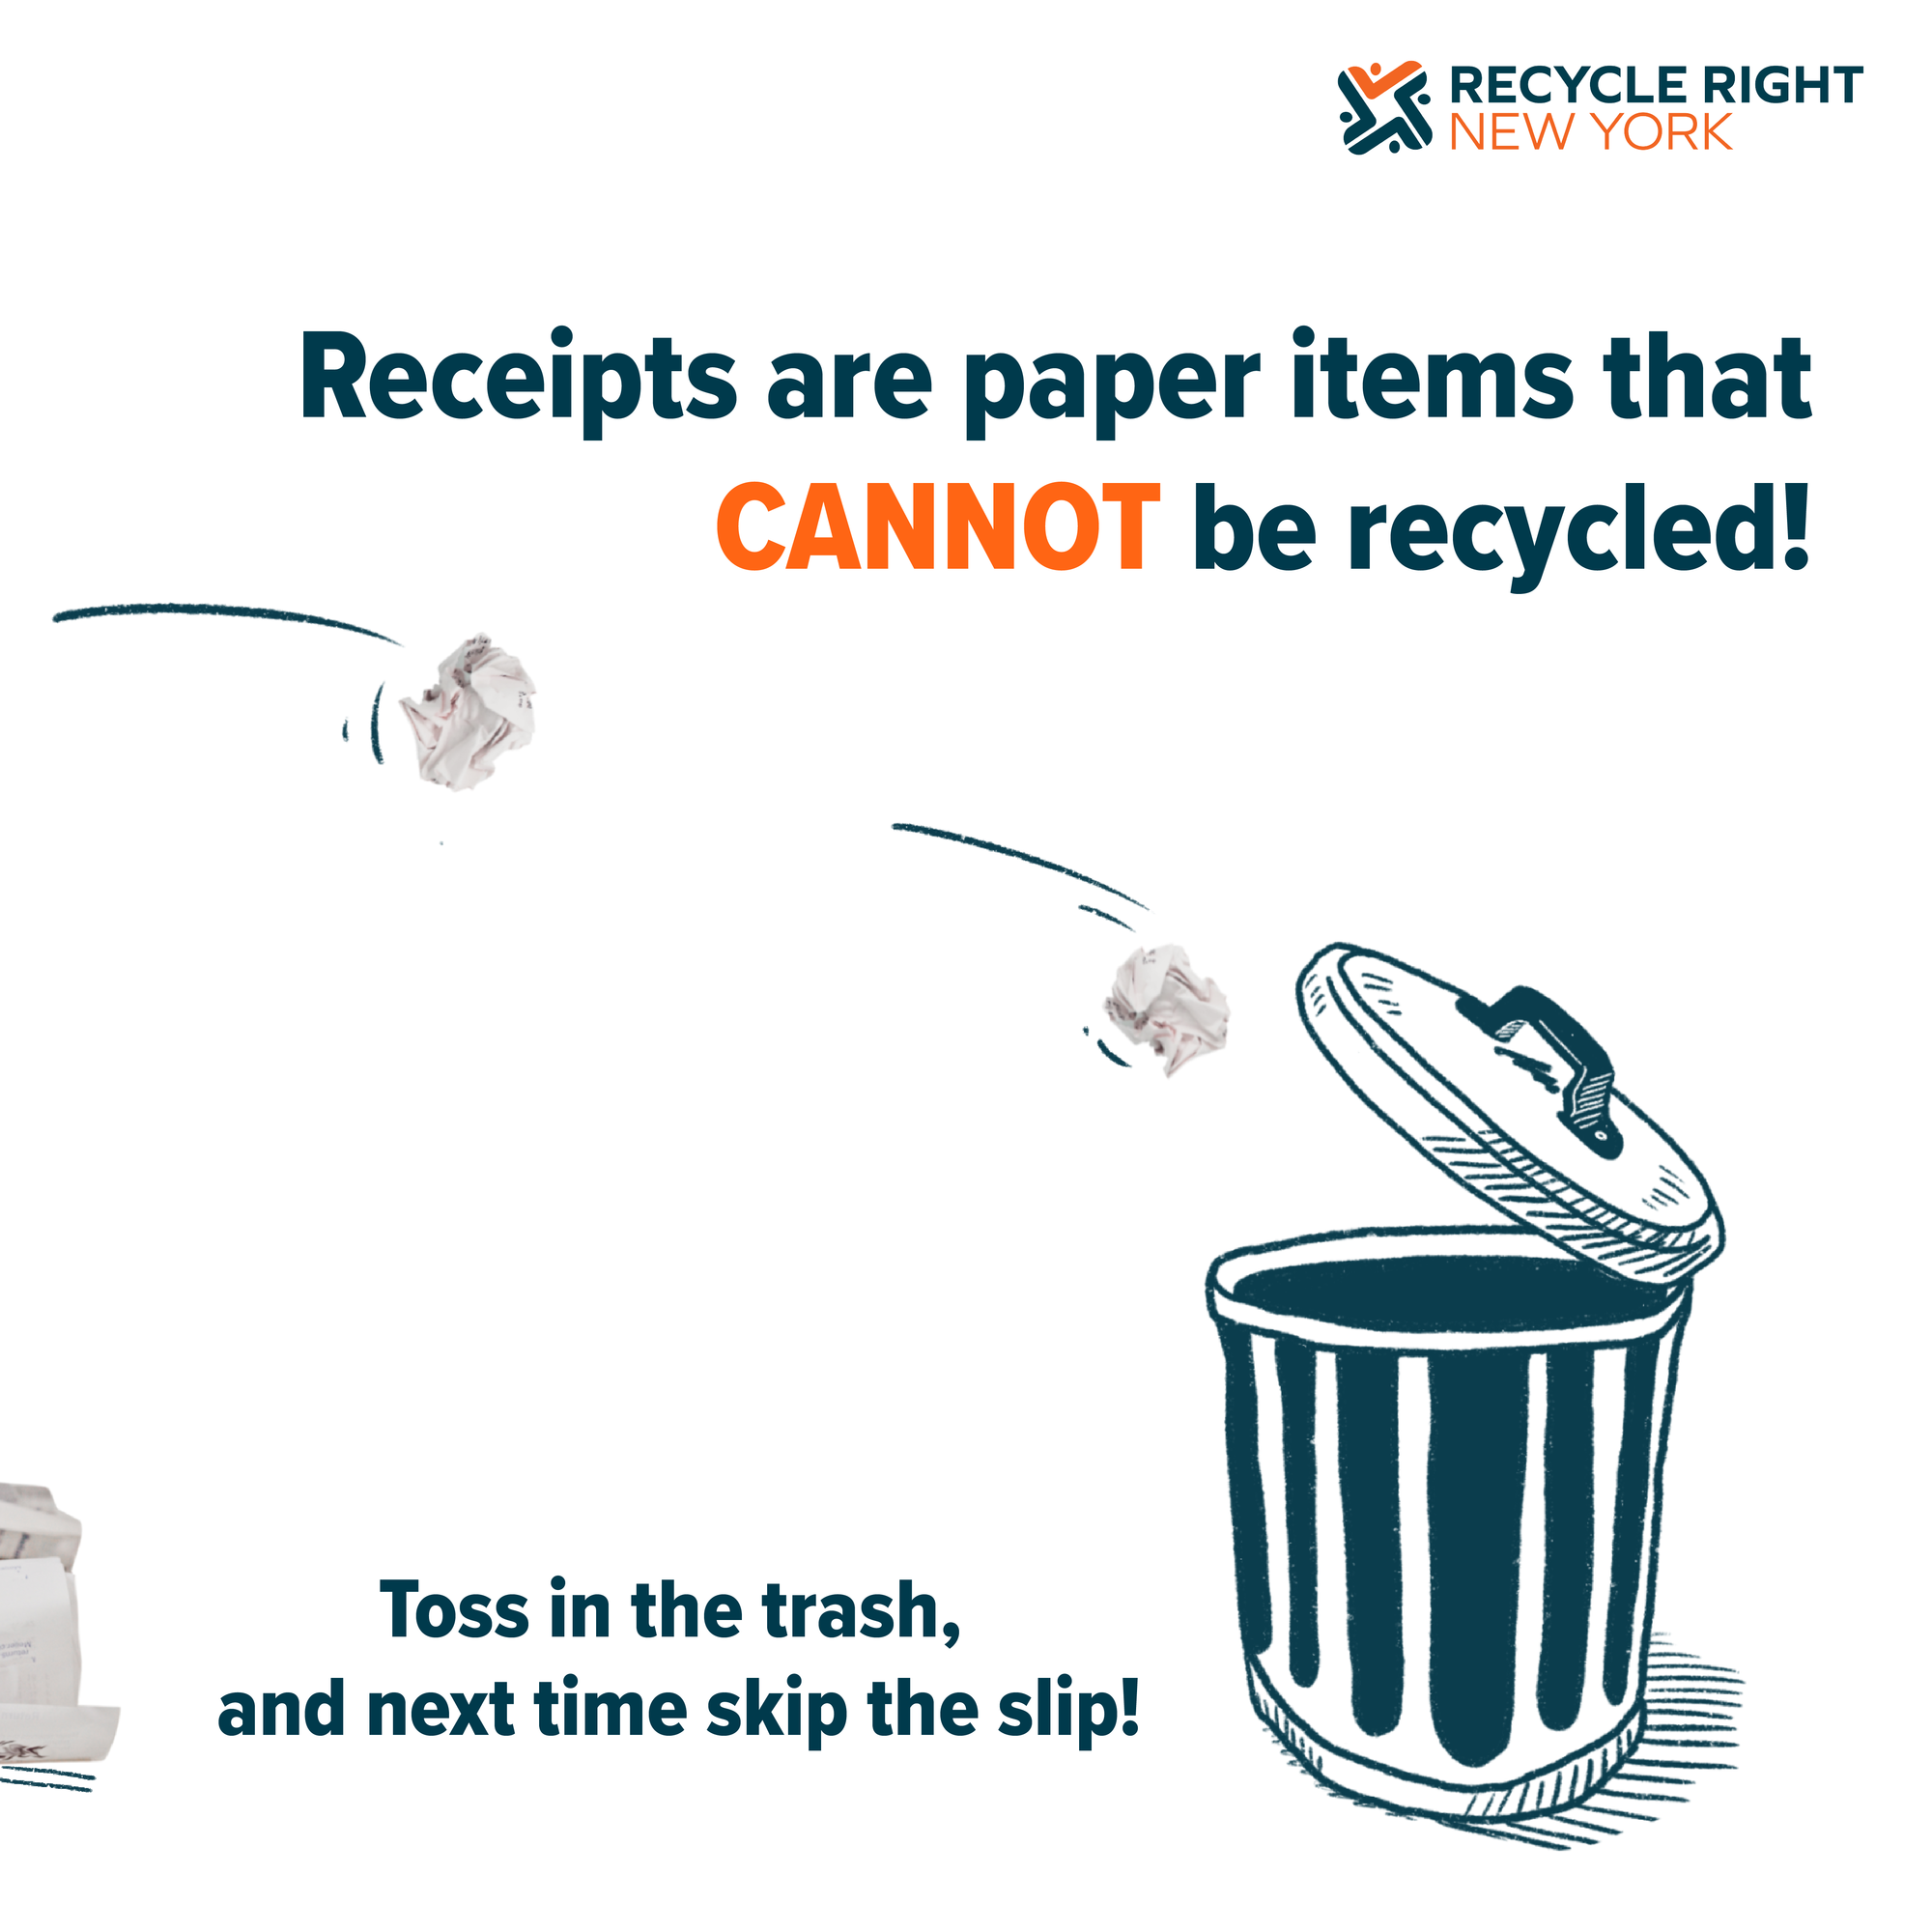 Don't Recycle Receipts